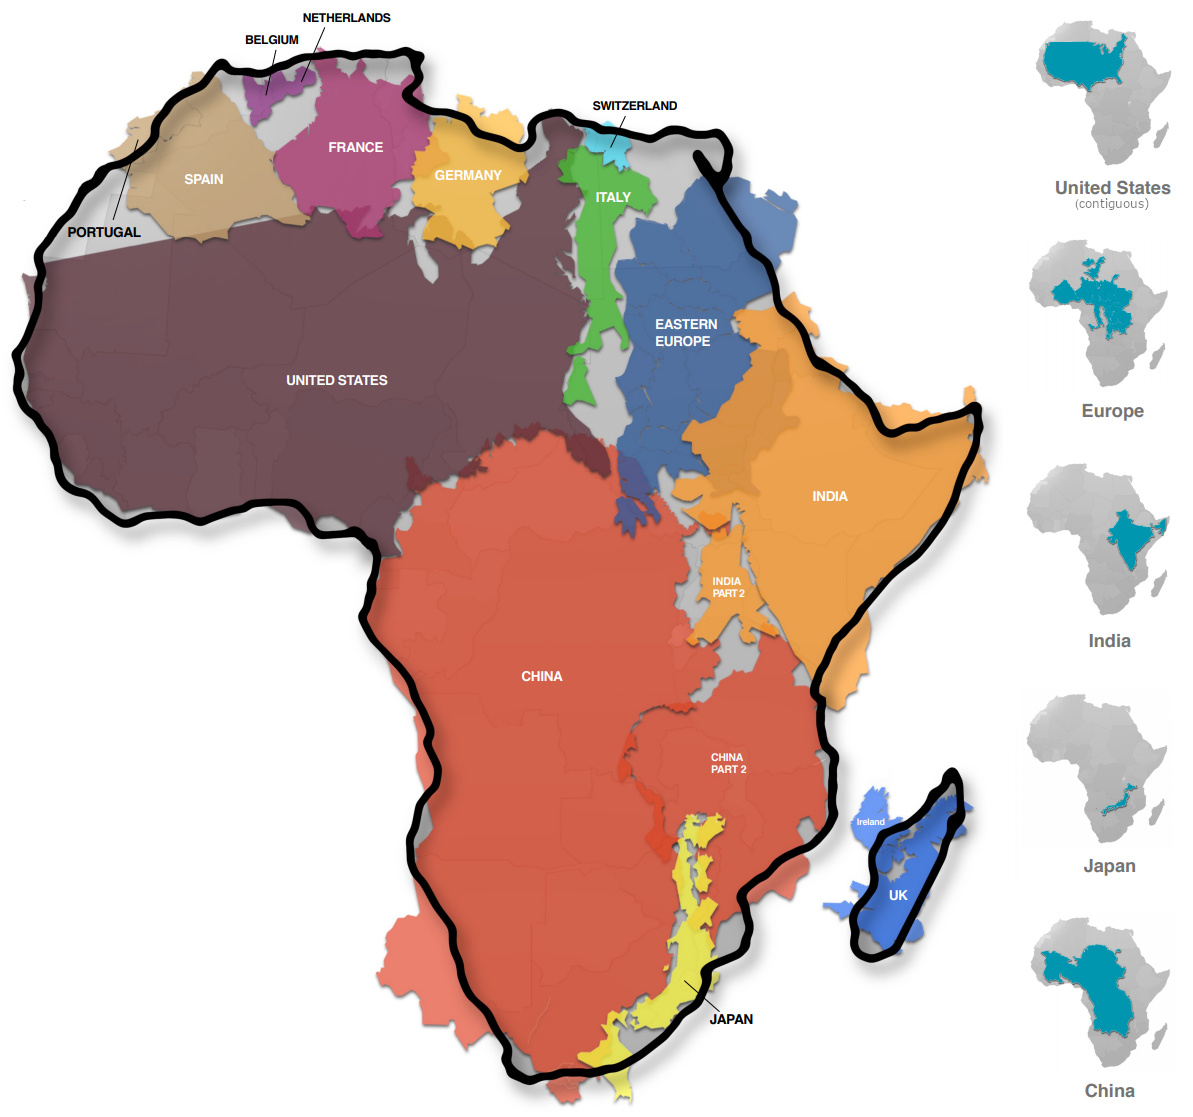 The True Size Of Africa Map Mapped: Visualizing the True Size of Africa | Markets Insider